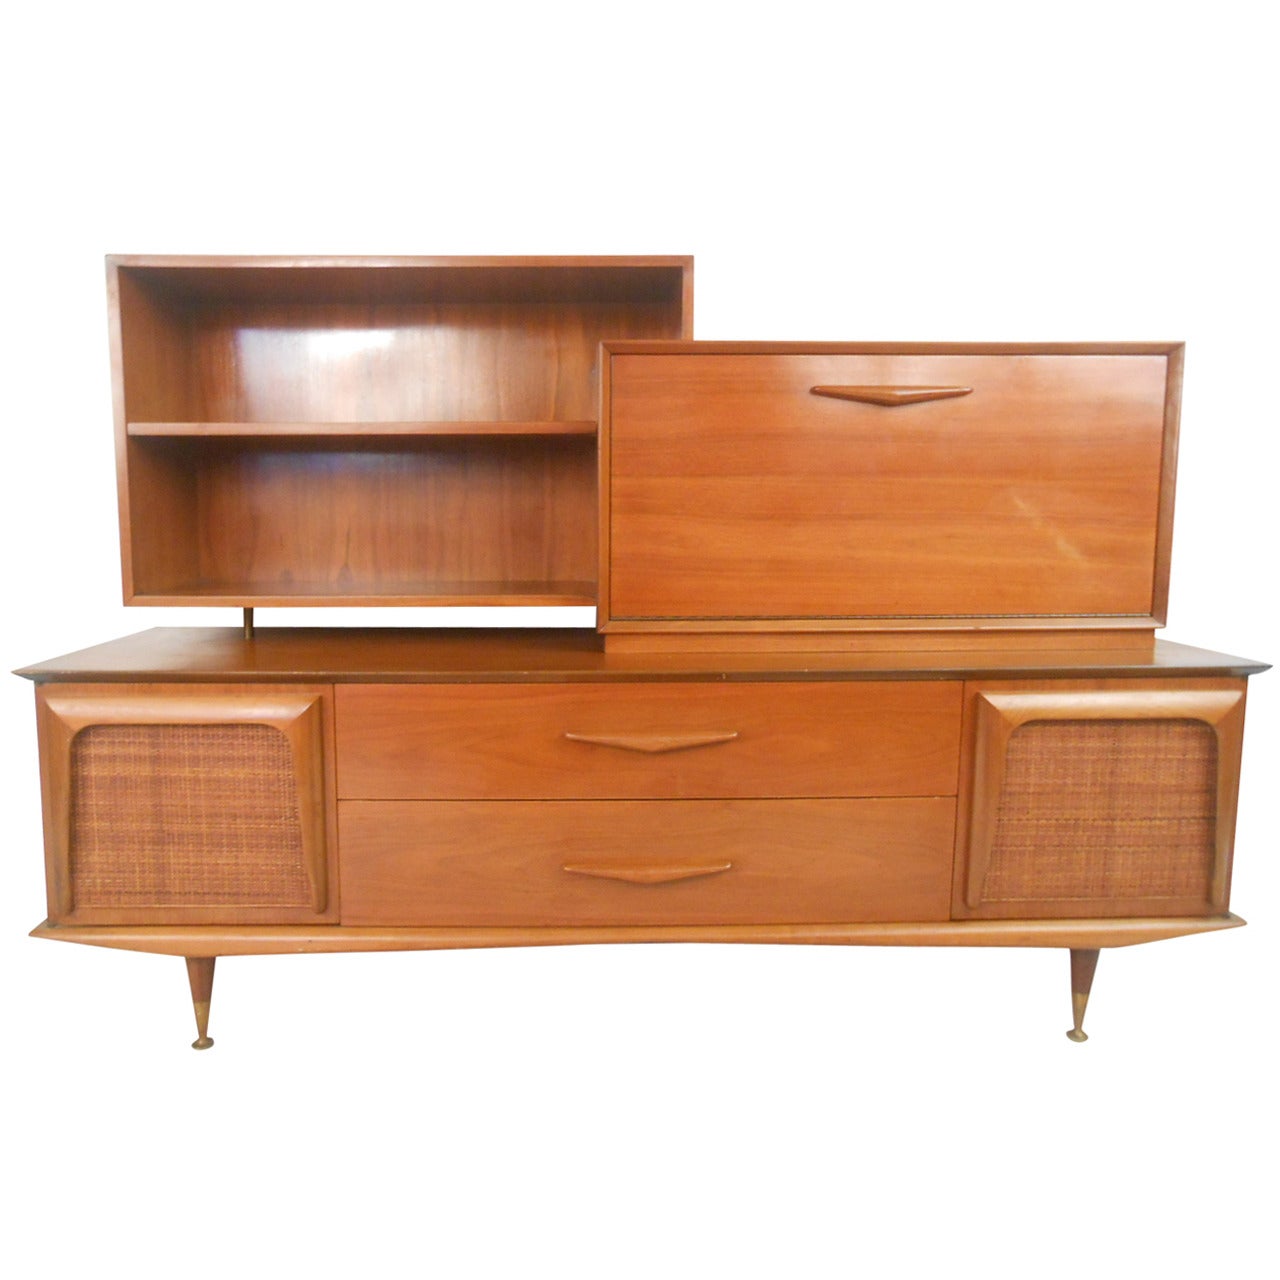 Unique Mid-Century Modern Sideboard Shelving Display With Dropfront Bar